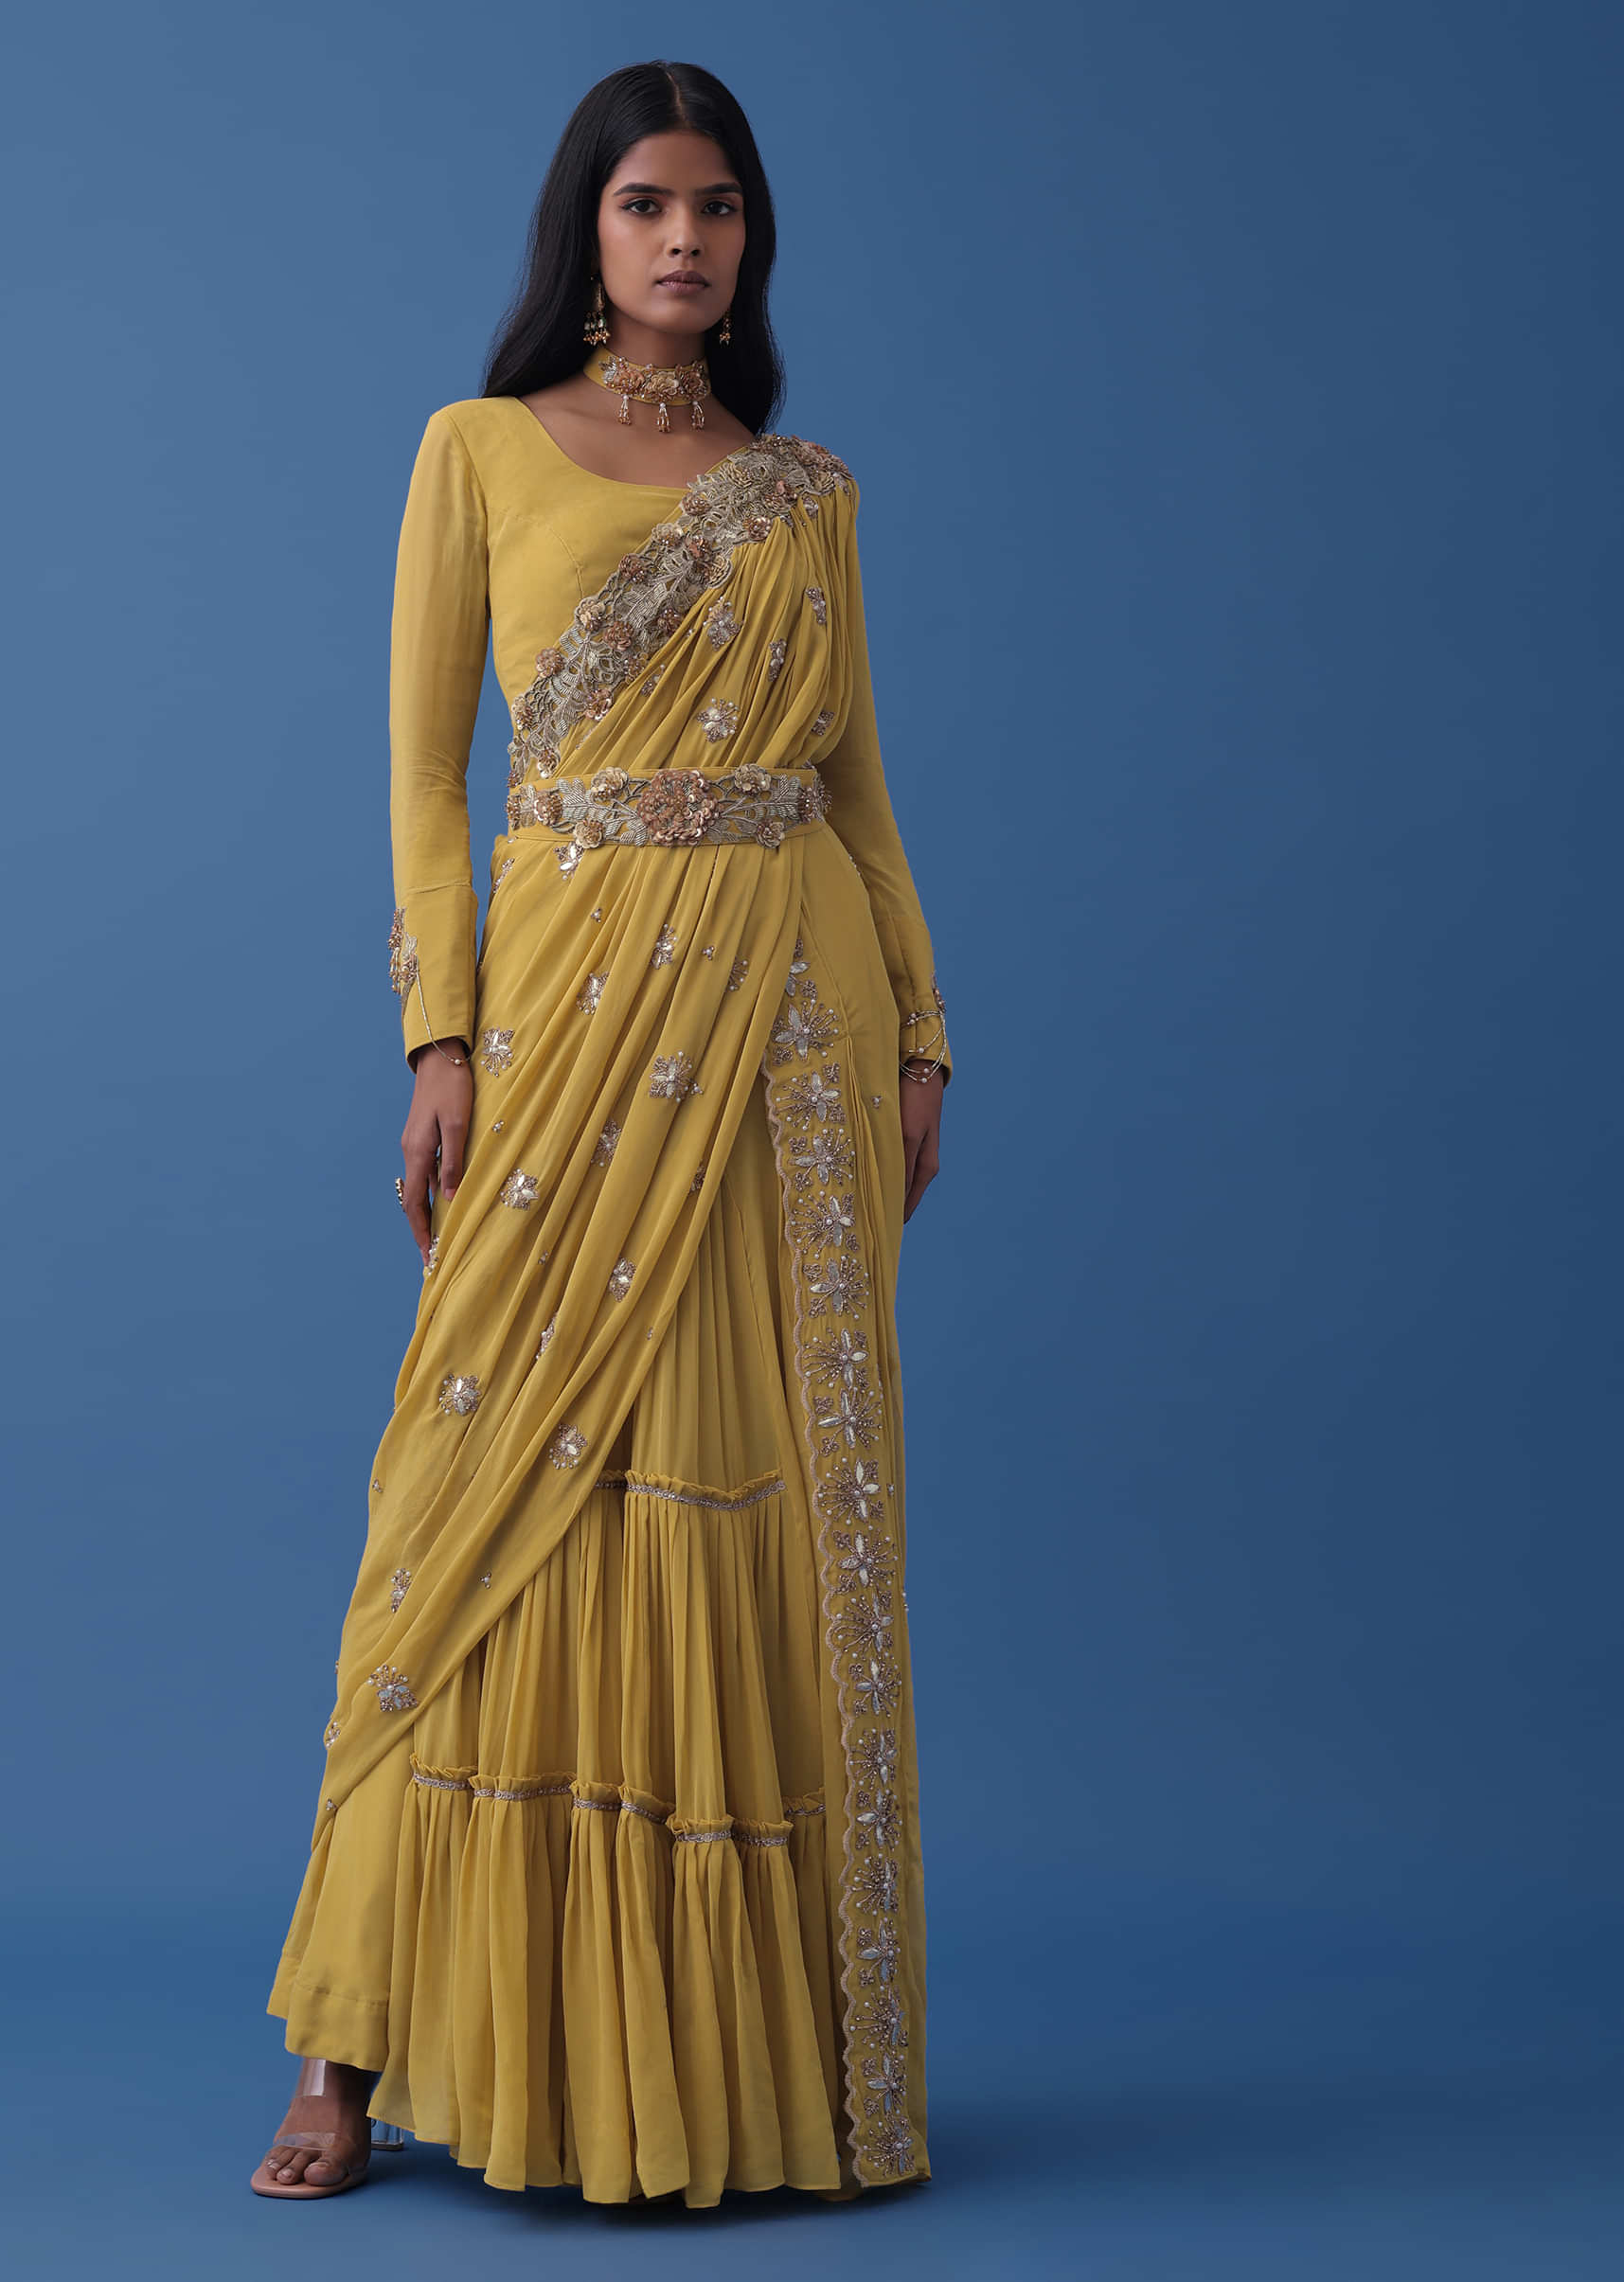 How to Style Designer Saree Party Wear in Different Ways - House of Surya